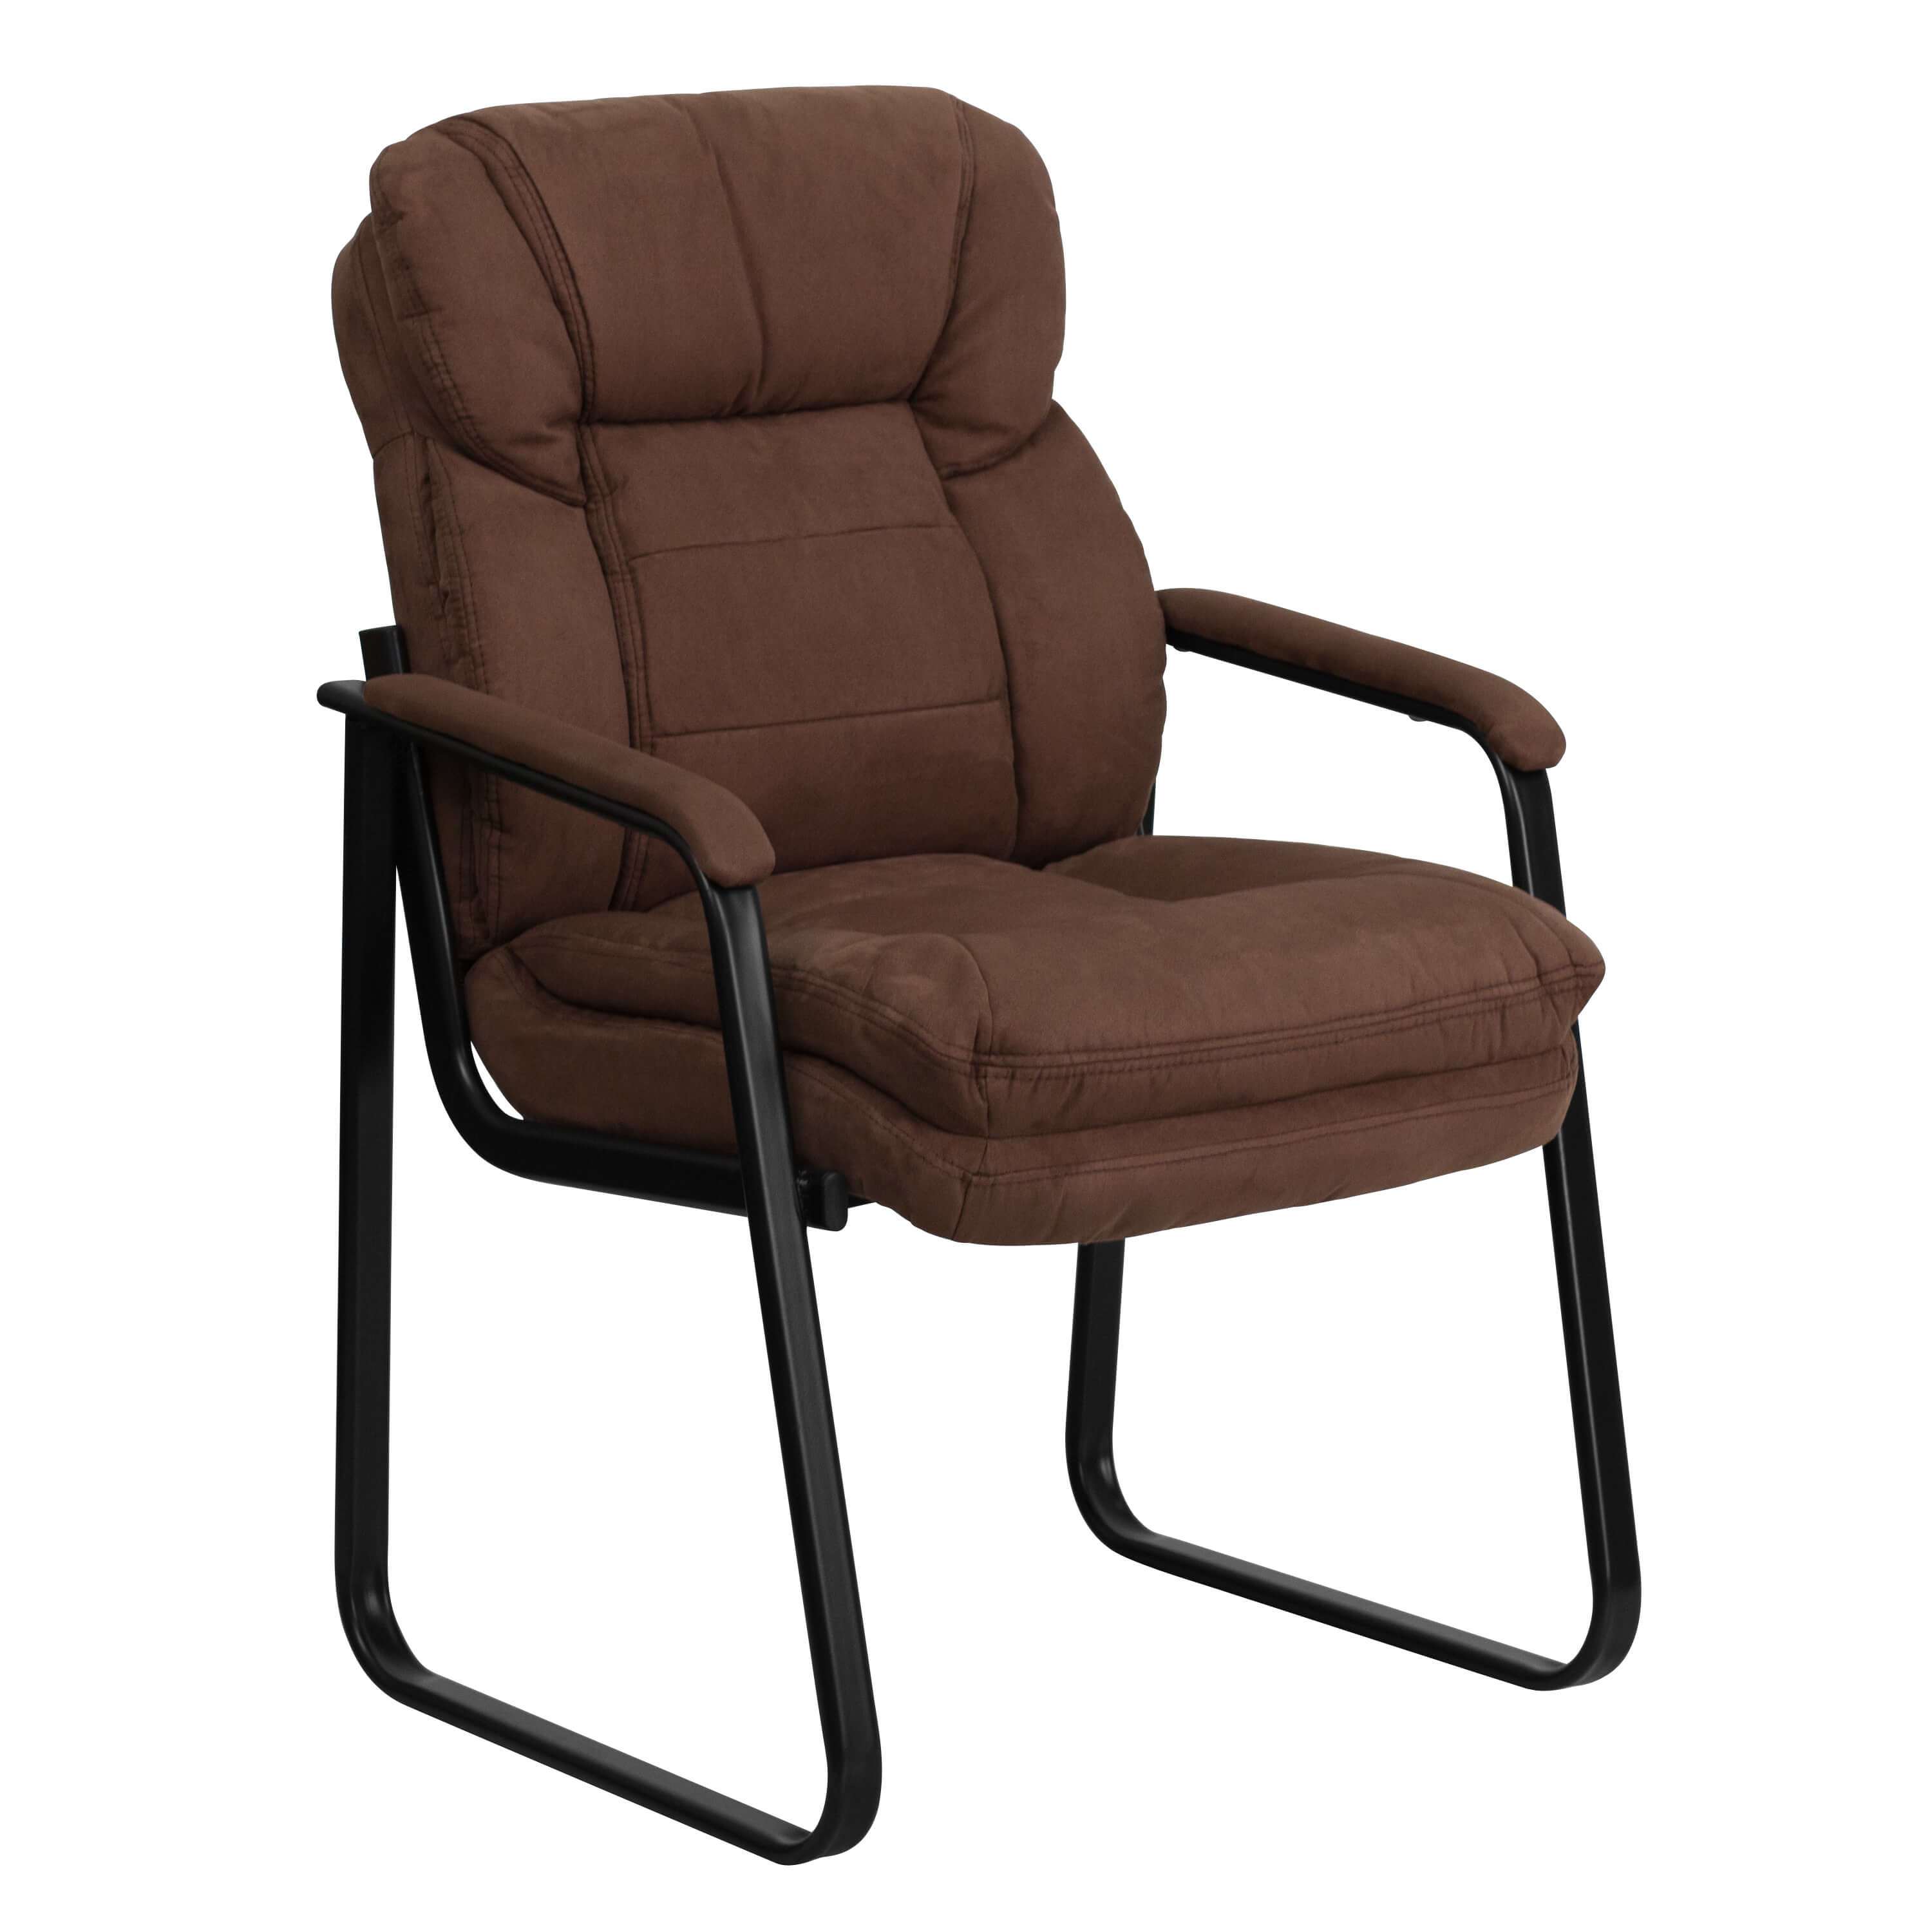 Side chairs with arms CUB GO 1156 BN GG ALF